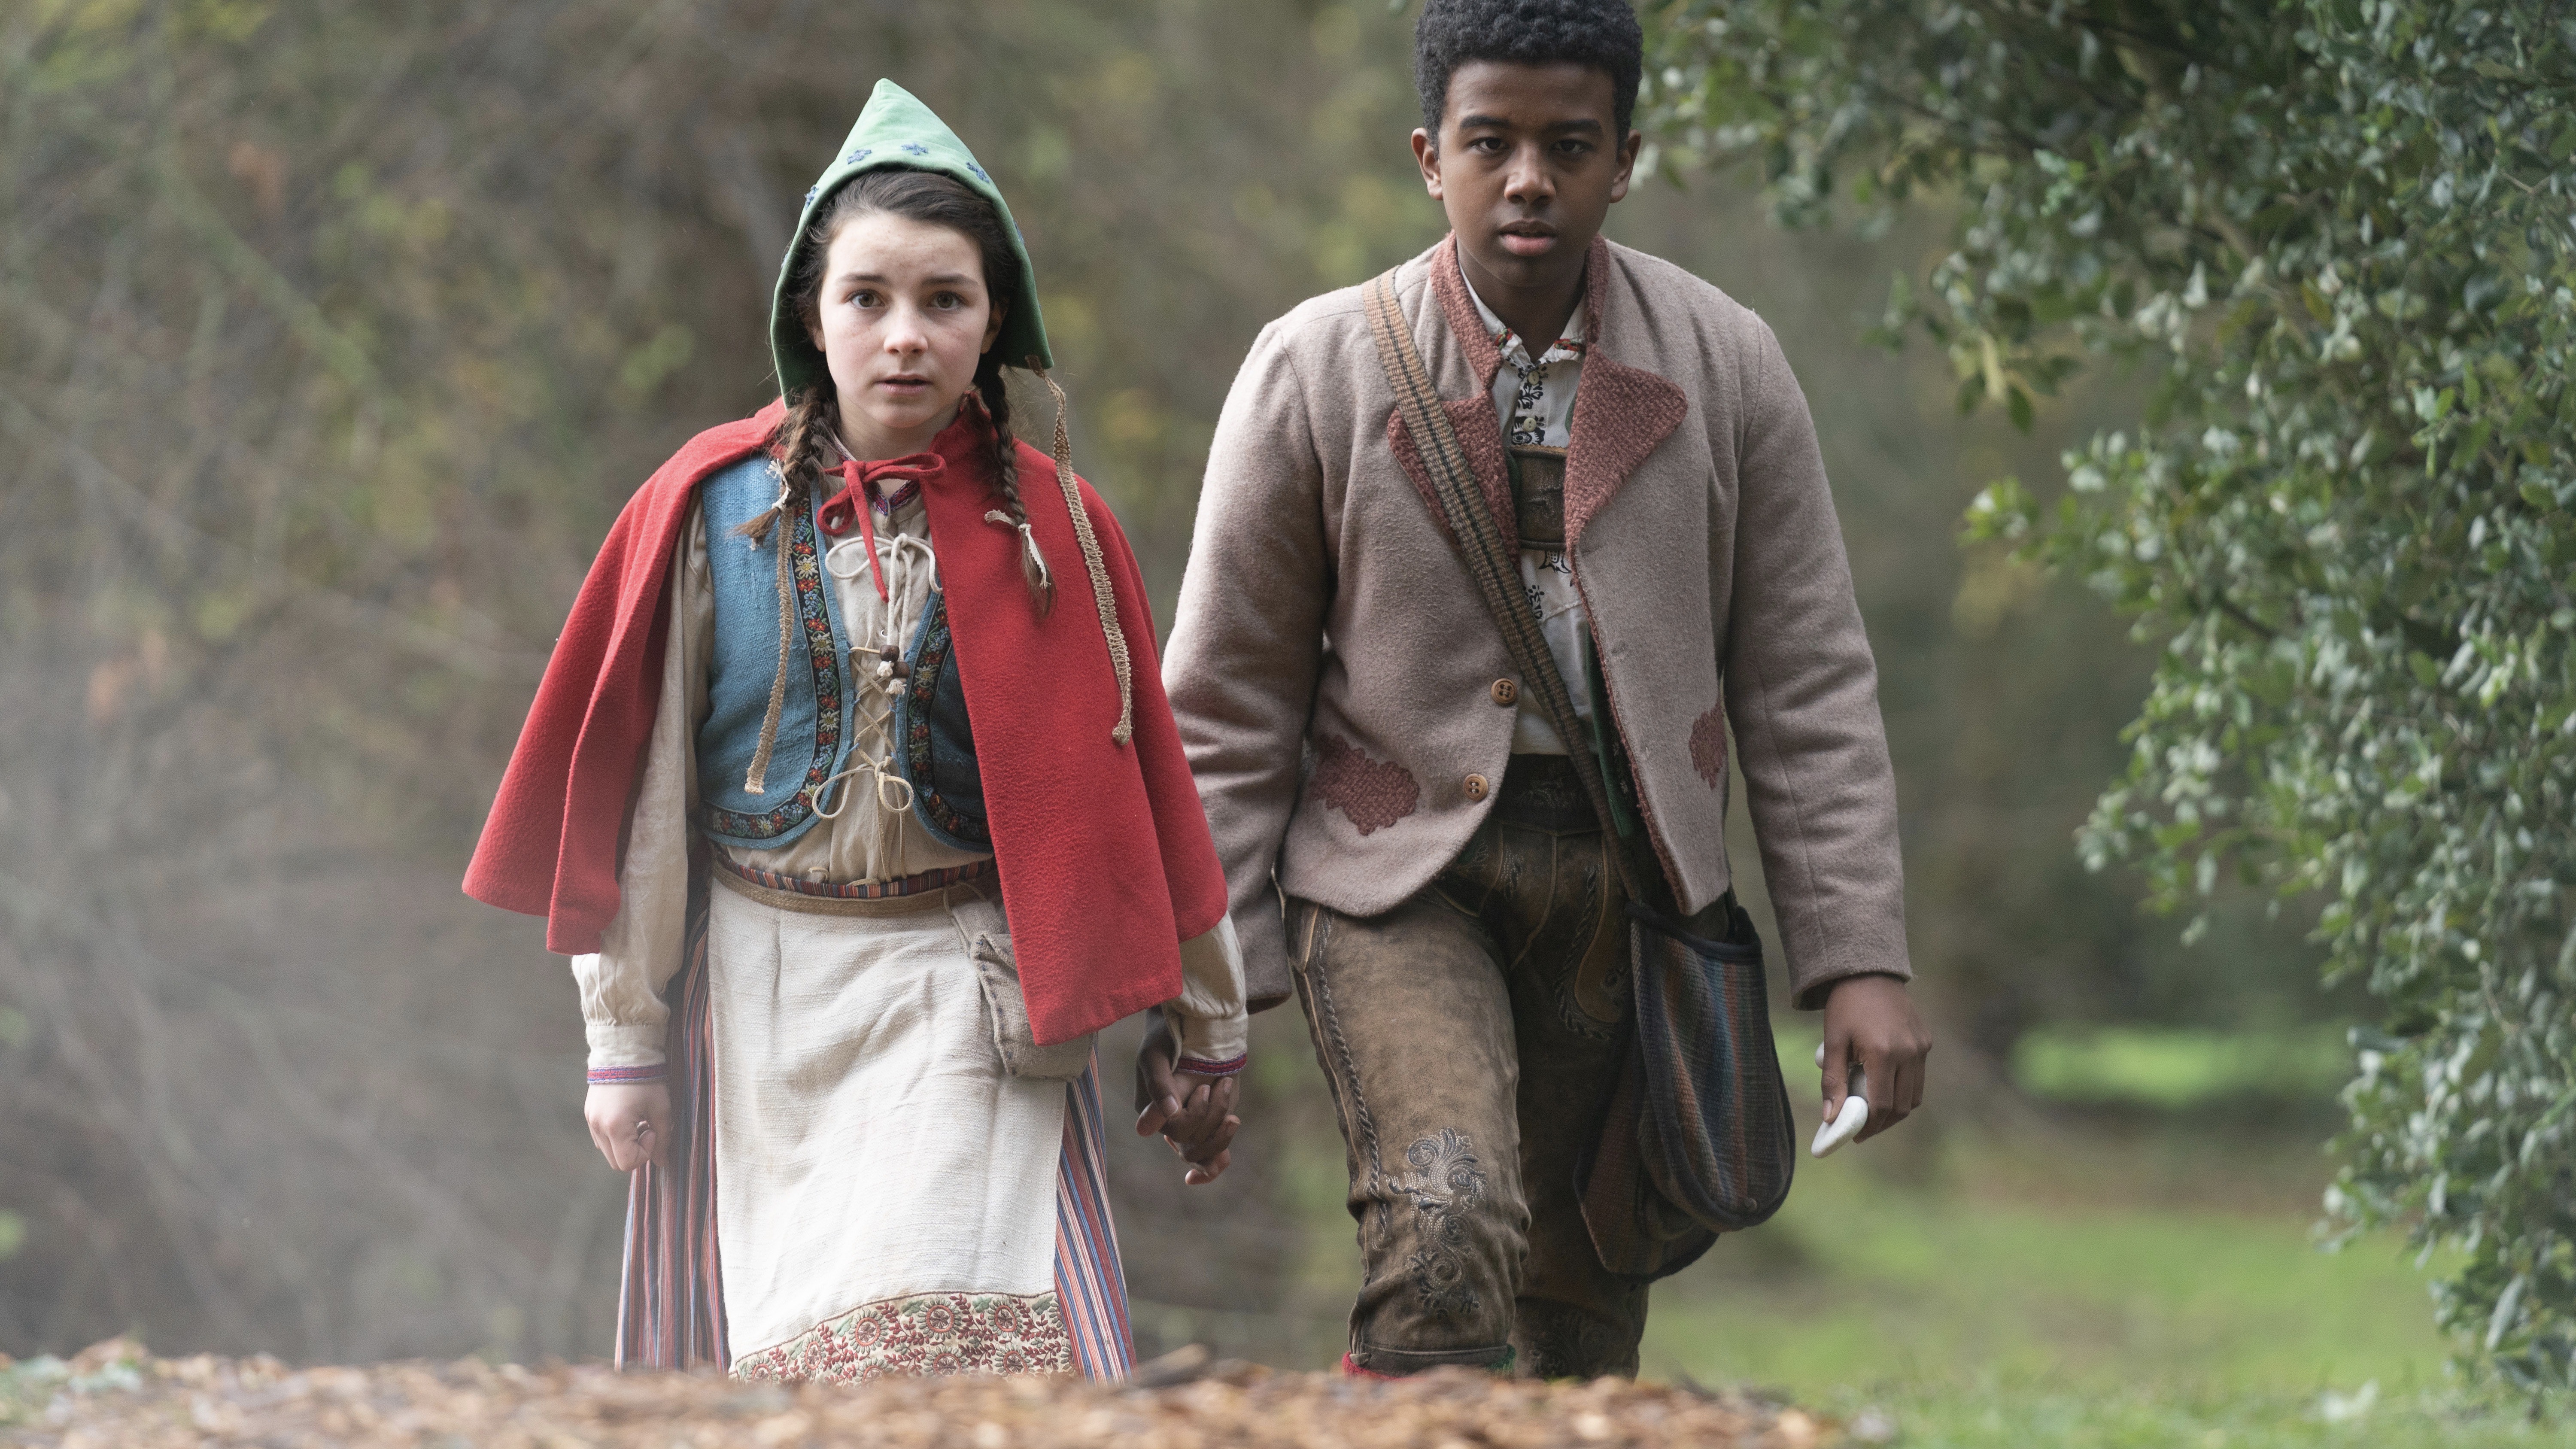 Lilly Aspell and Bill Bekele in Hansel & Gretel: After Ever After